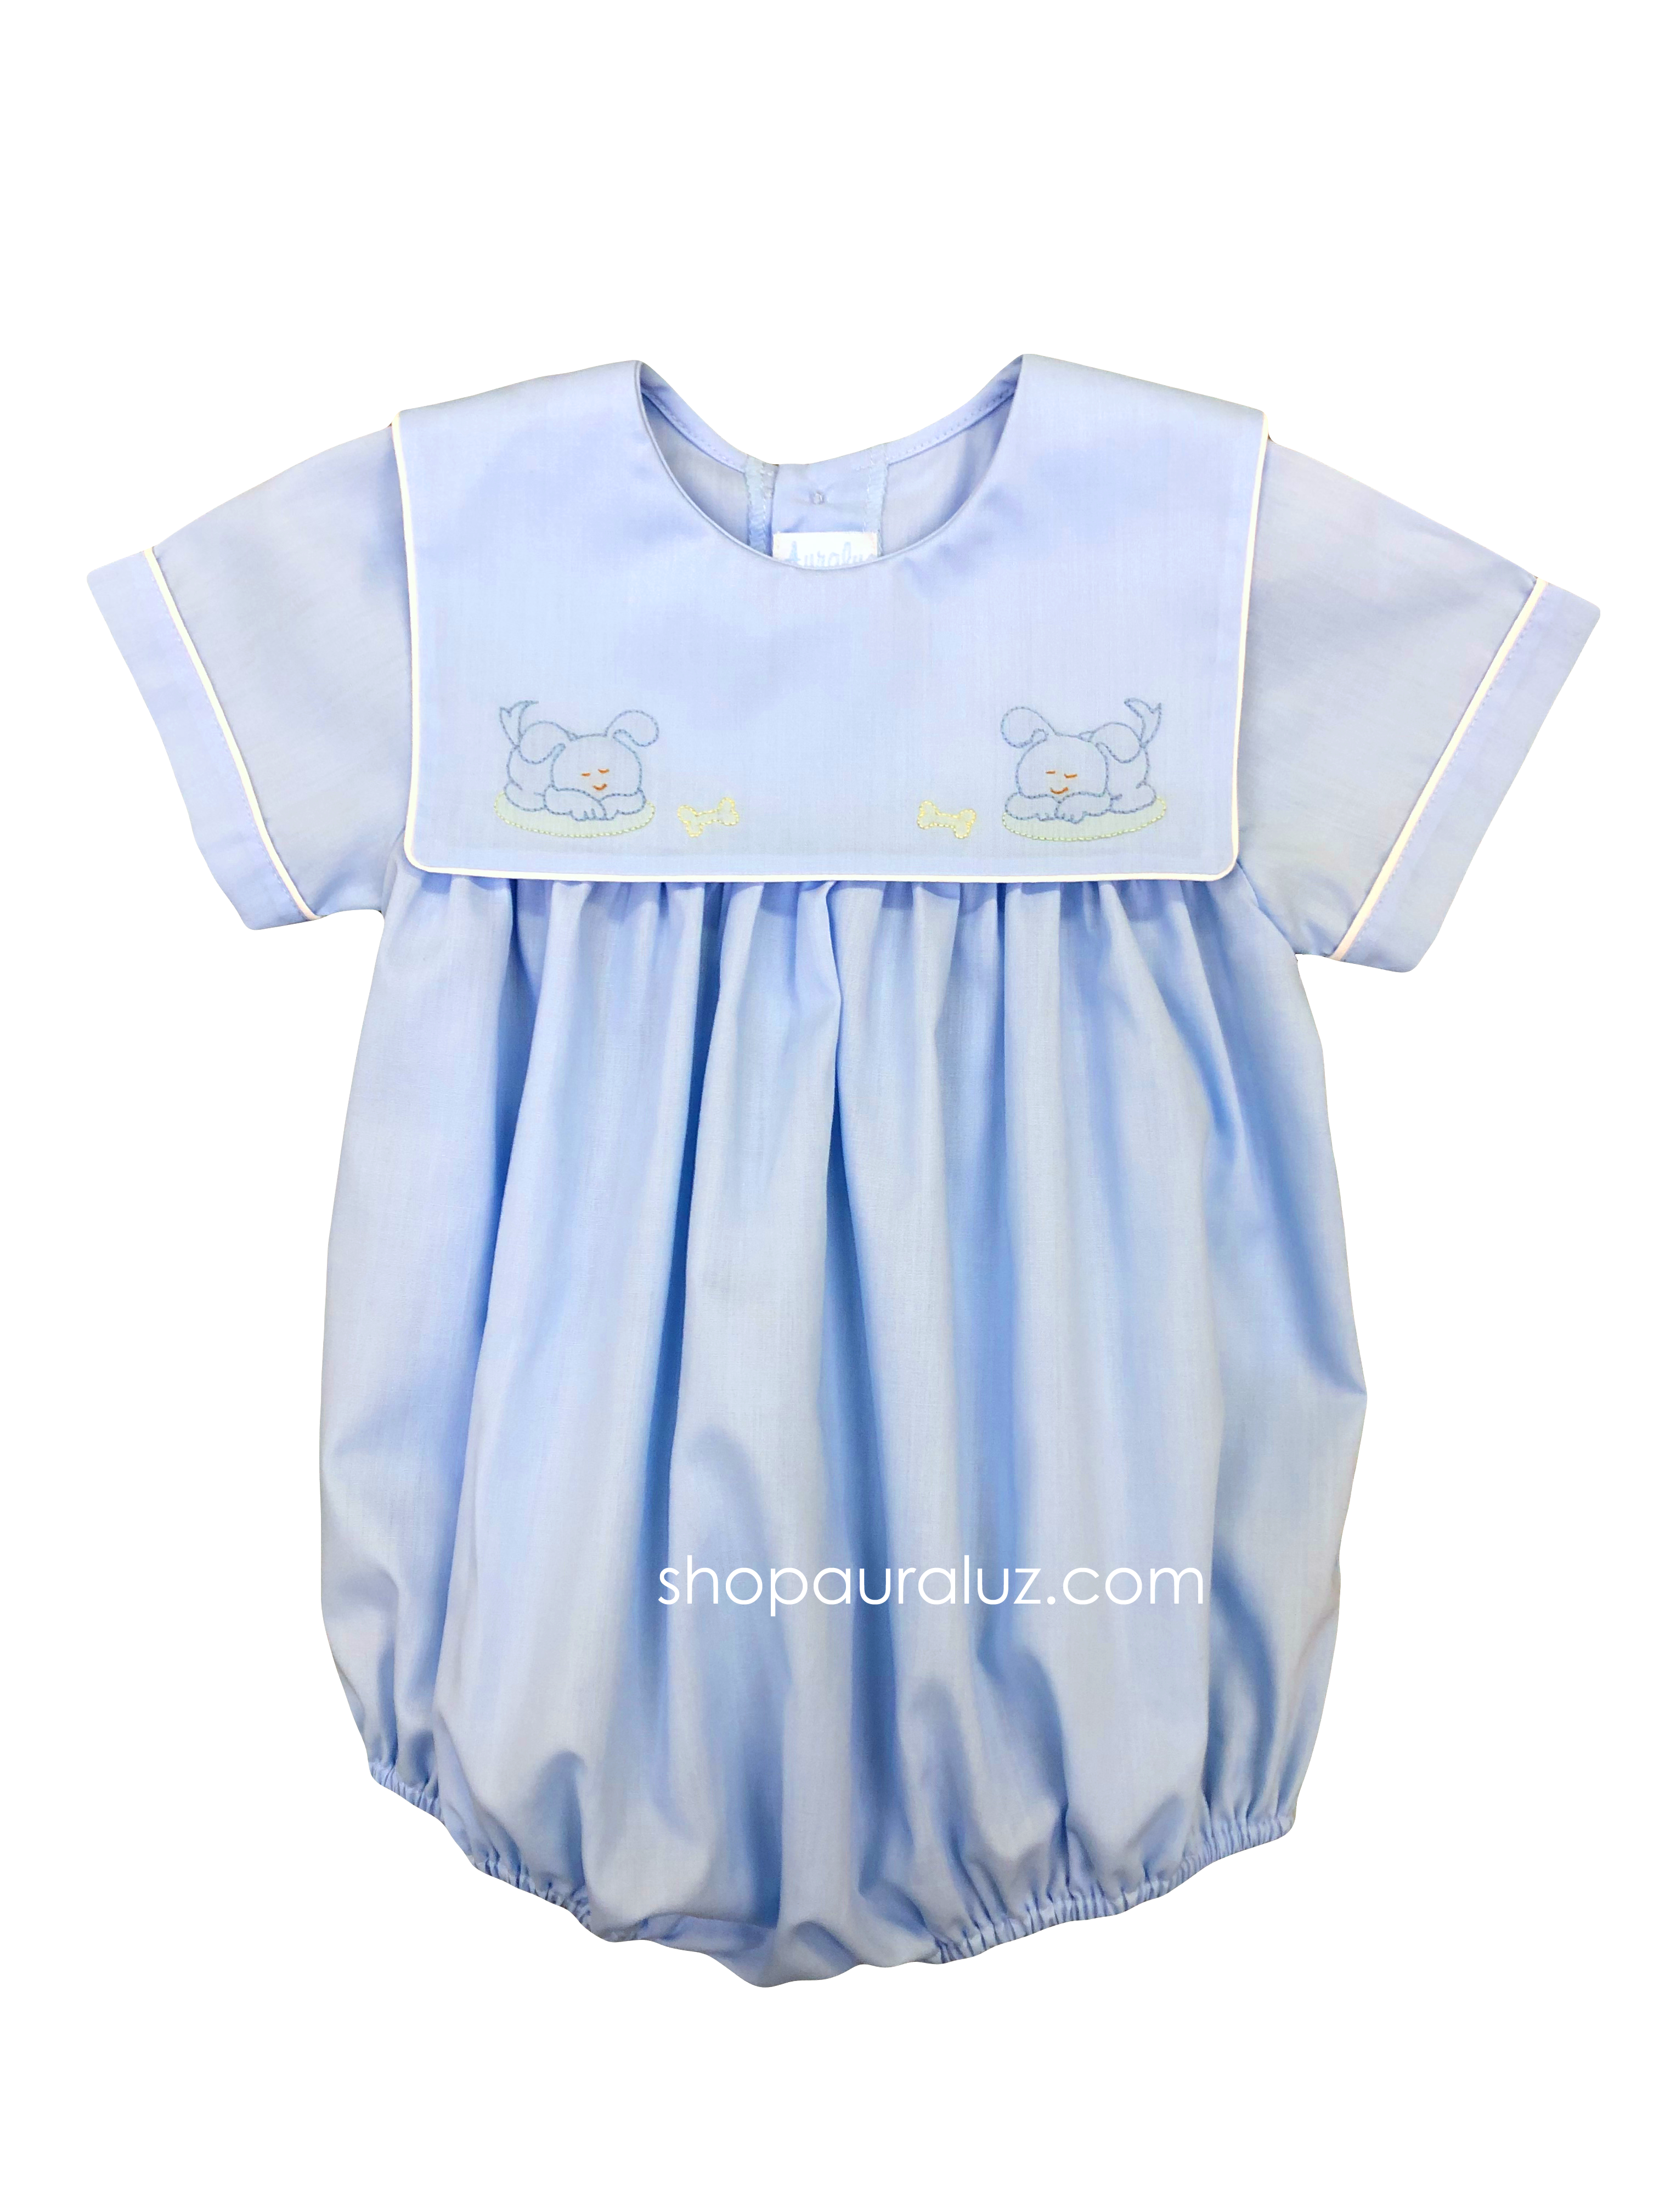 Auraluz Boy Bubble..Blue with blue square collar and embroidered puppy dogs